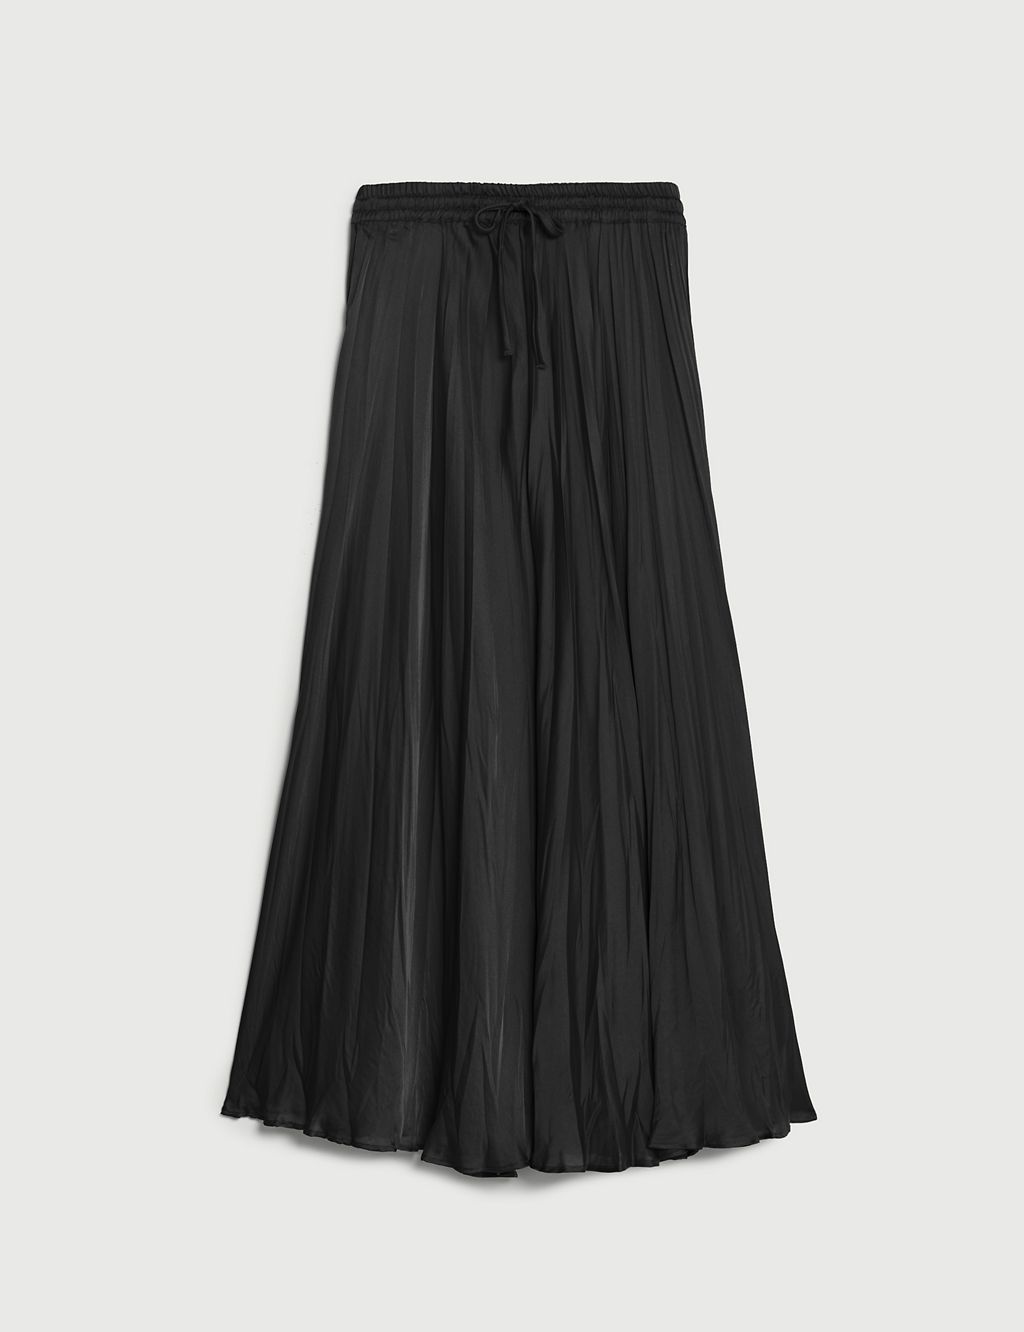 Satin Midaxi A-Line Skirt | M&S Collection | M&S